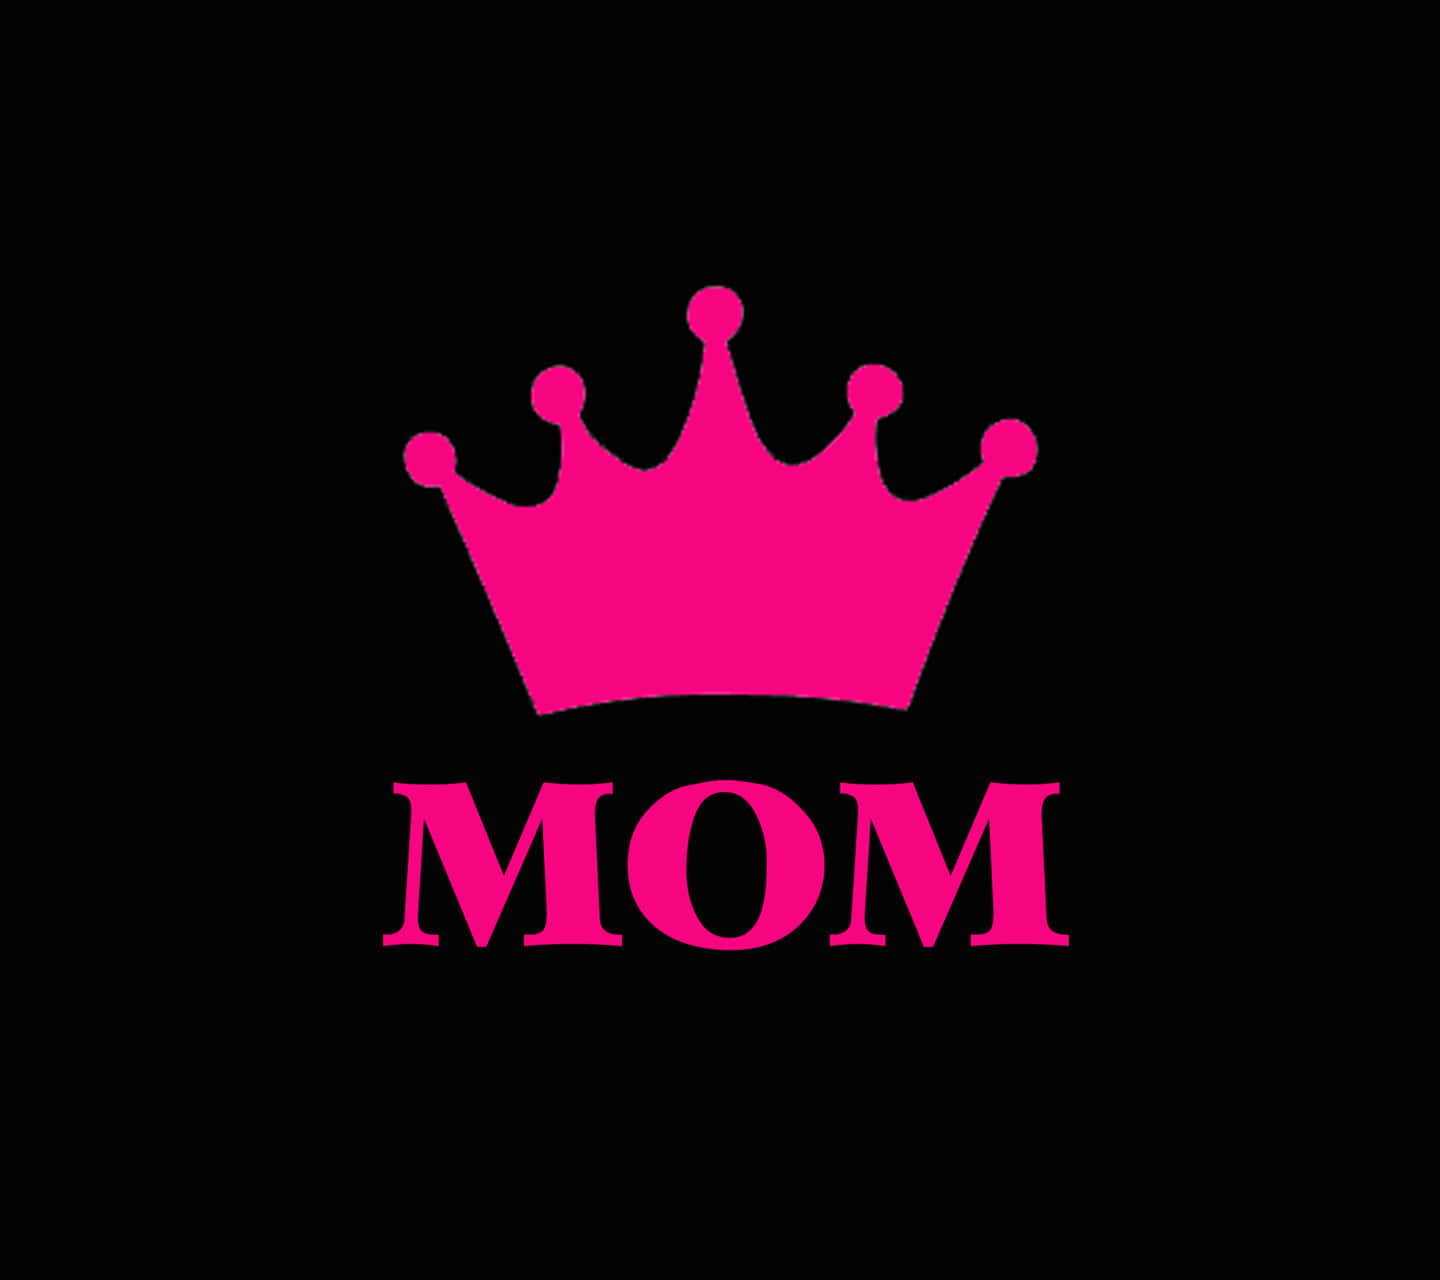 Pink Crown Mom Graphic Wallpaper